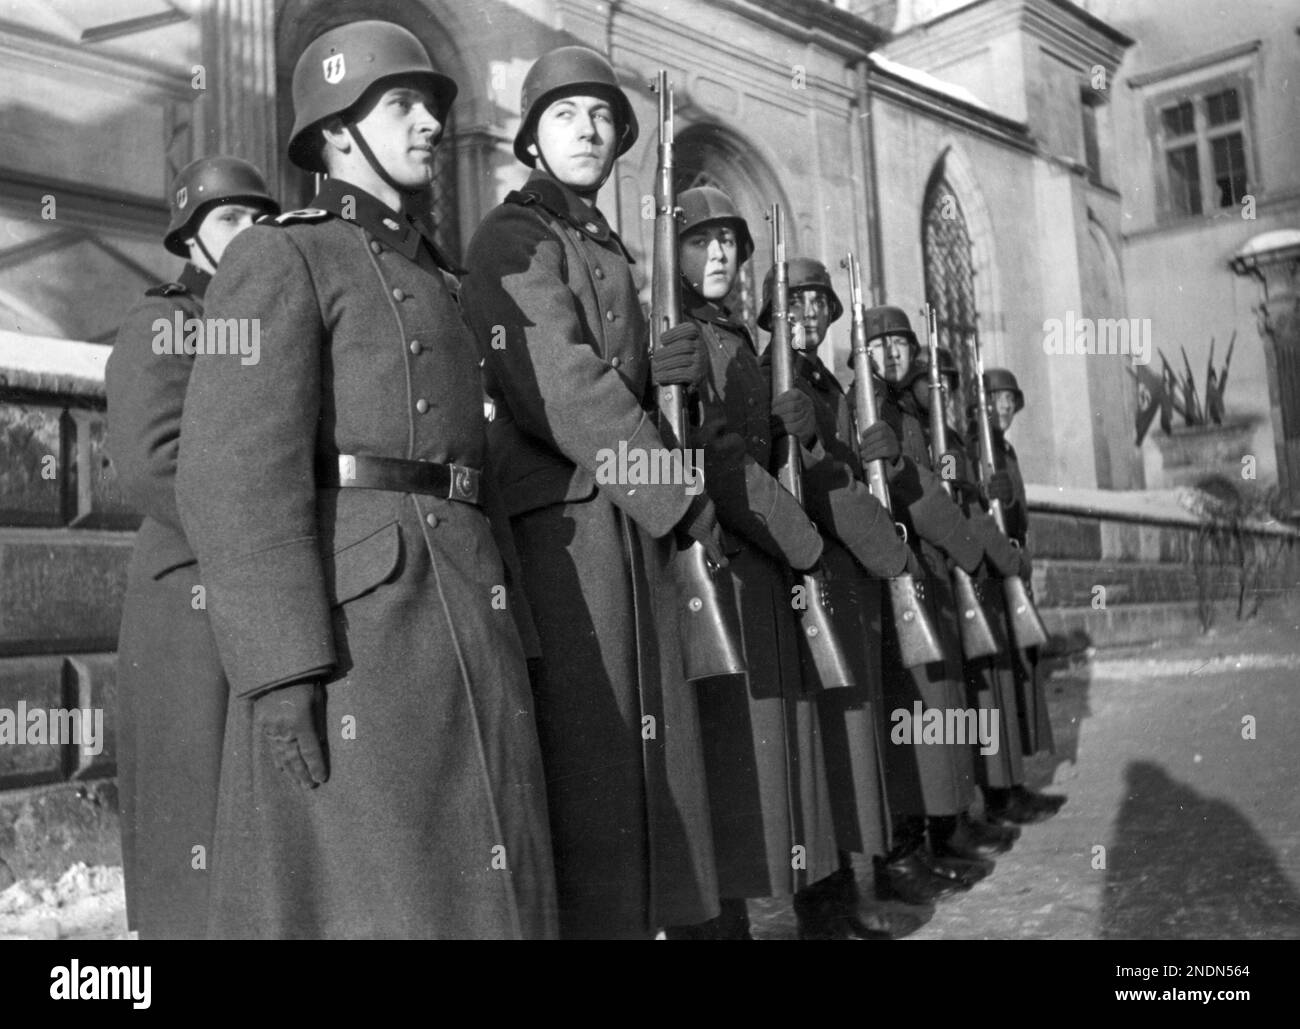 Soldiers of the 10th SS Totenkopf regiment during the changing of the guard at the Royal Castle in Krakow. SourceNac.gov.pl Stock Photo